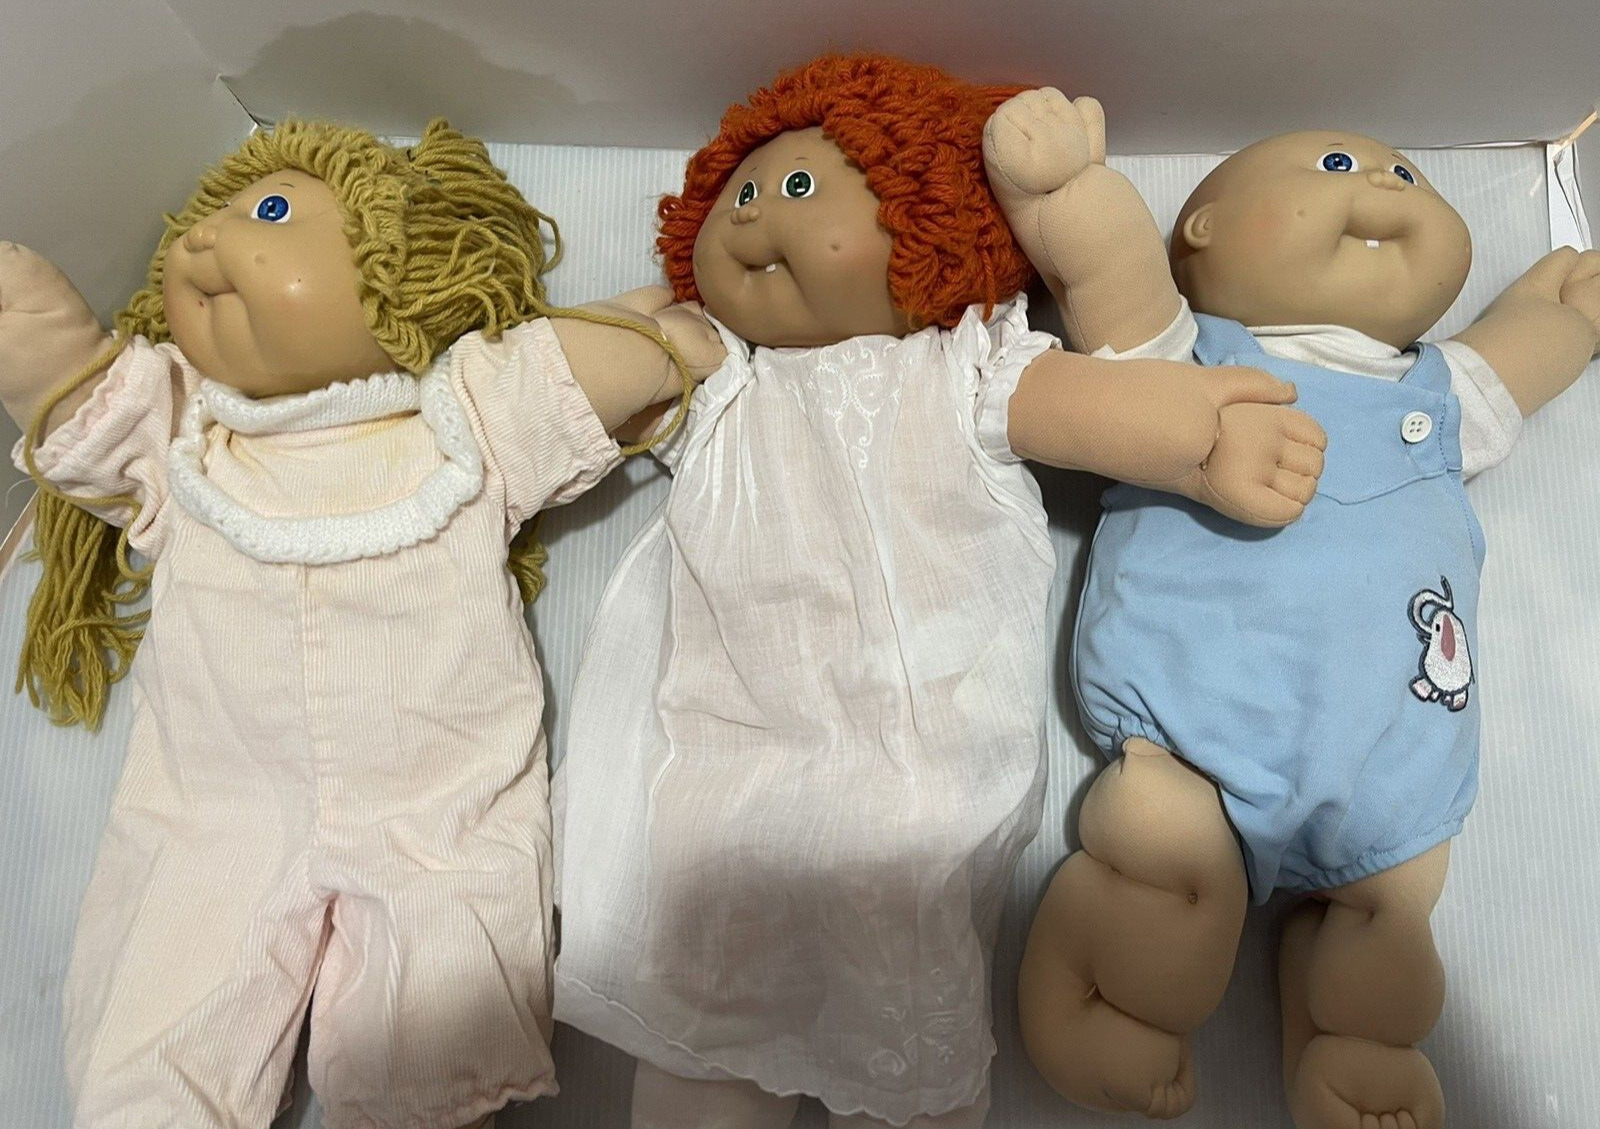 Used VTG LOT of 3 Cabbage Patch Kids CPK Baby Plush Dolls